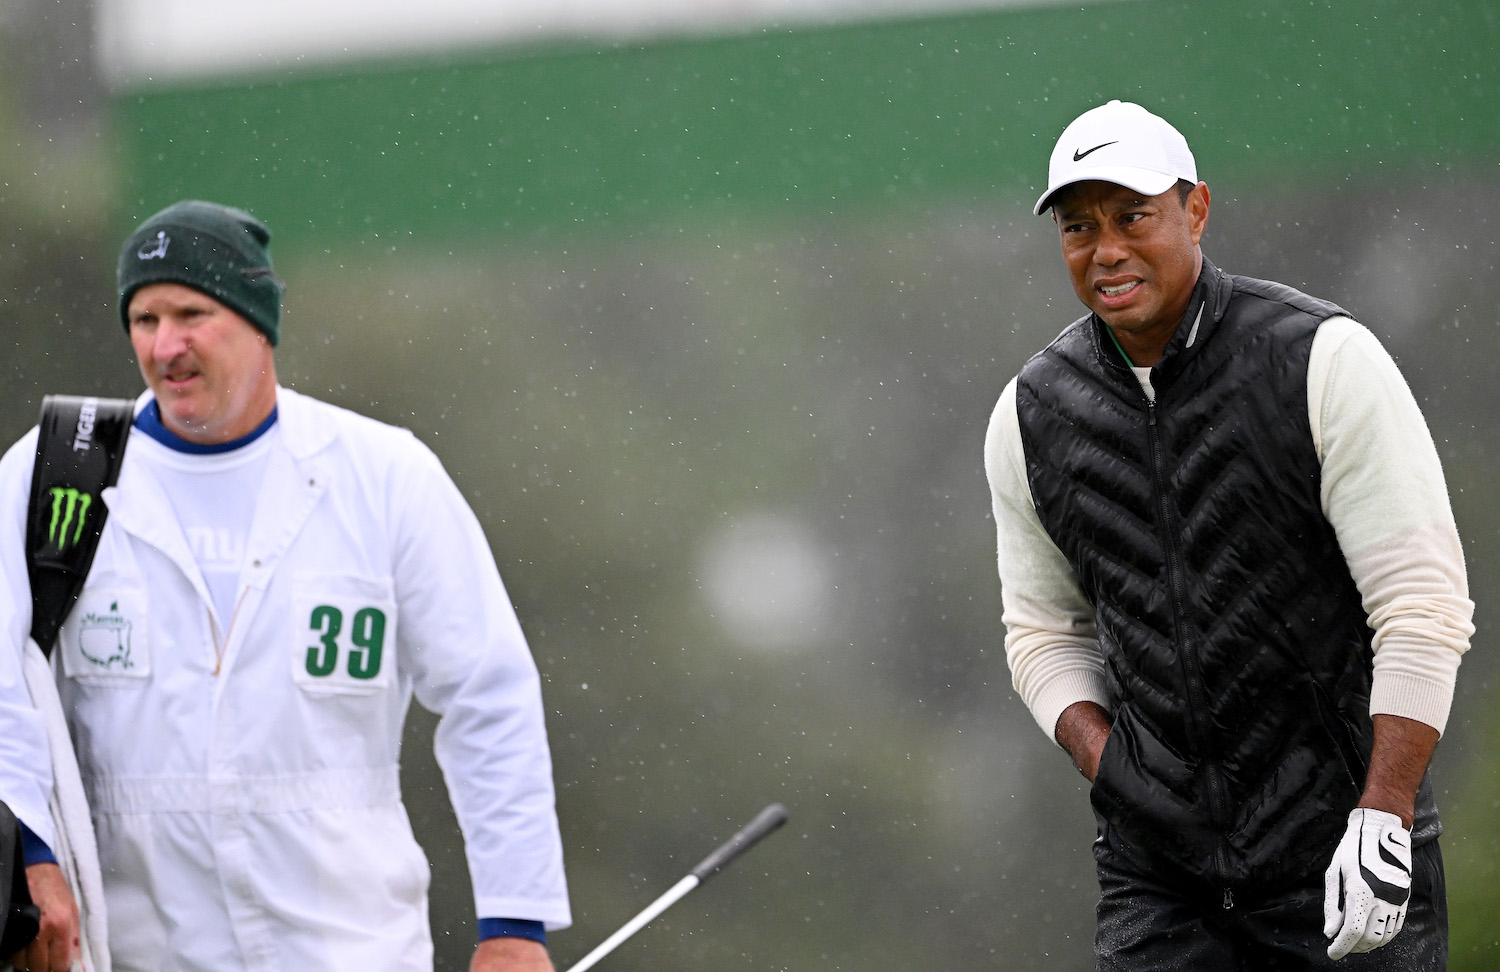 Tiger Woods Withdraws from 2023 Masters Tournament Due to Foot Injury